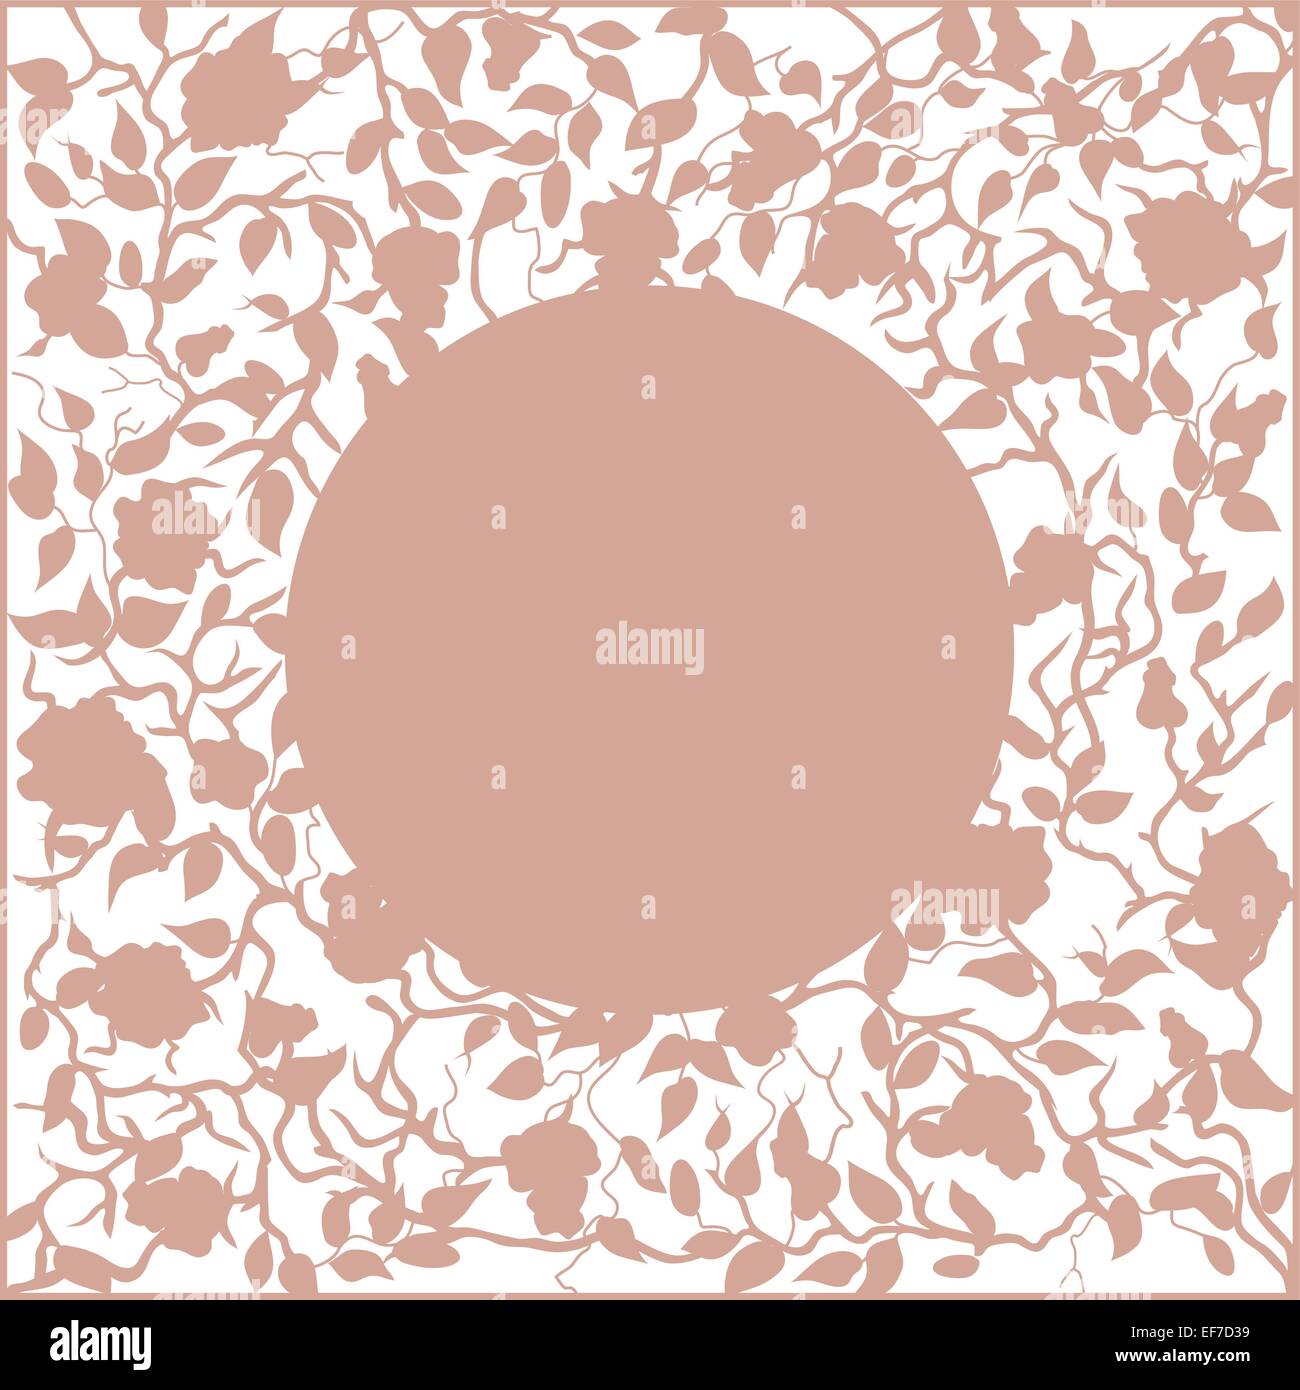 The text in the pink circle framed with branches with pink roses and leaves on a white background Stock Vector